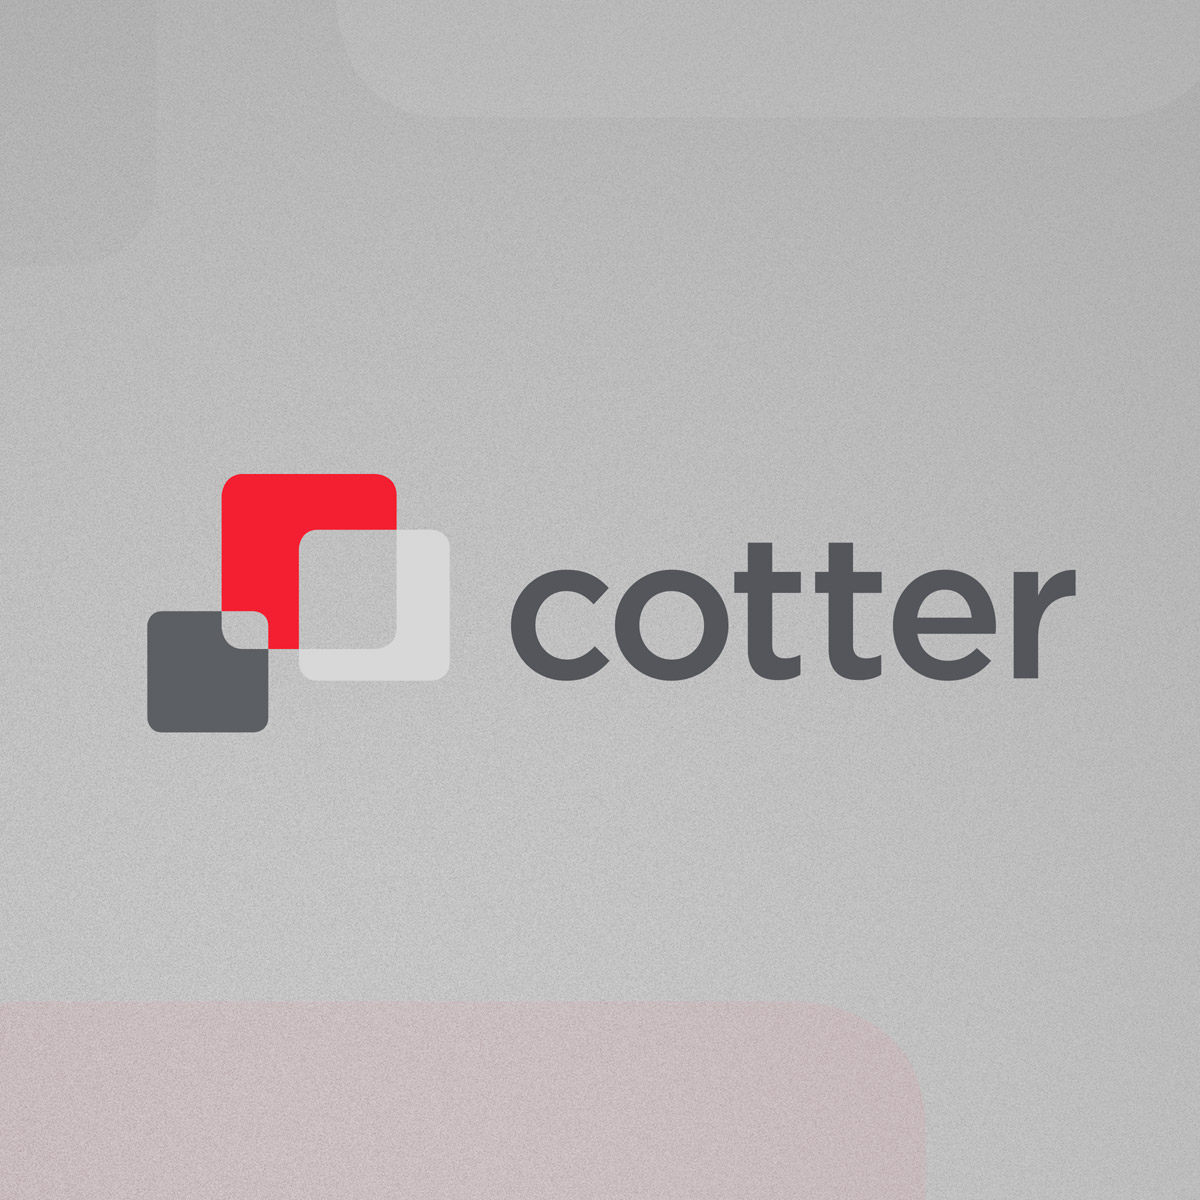 Cotter Consulting Website